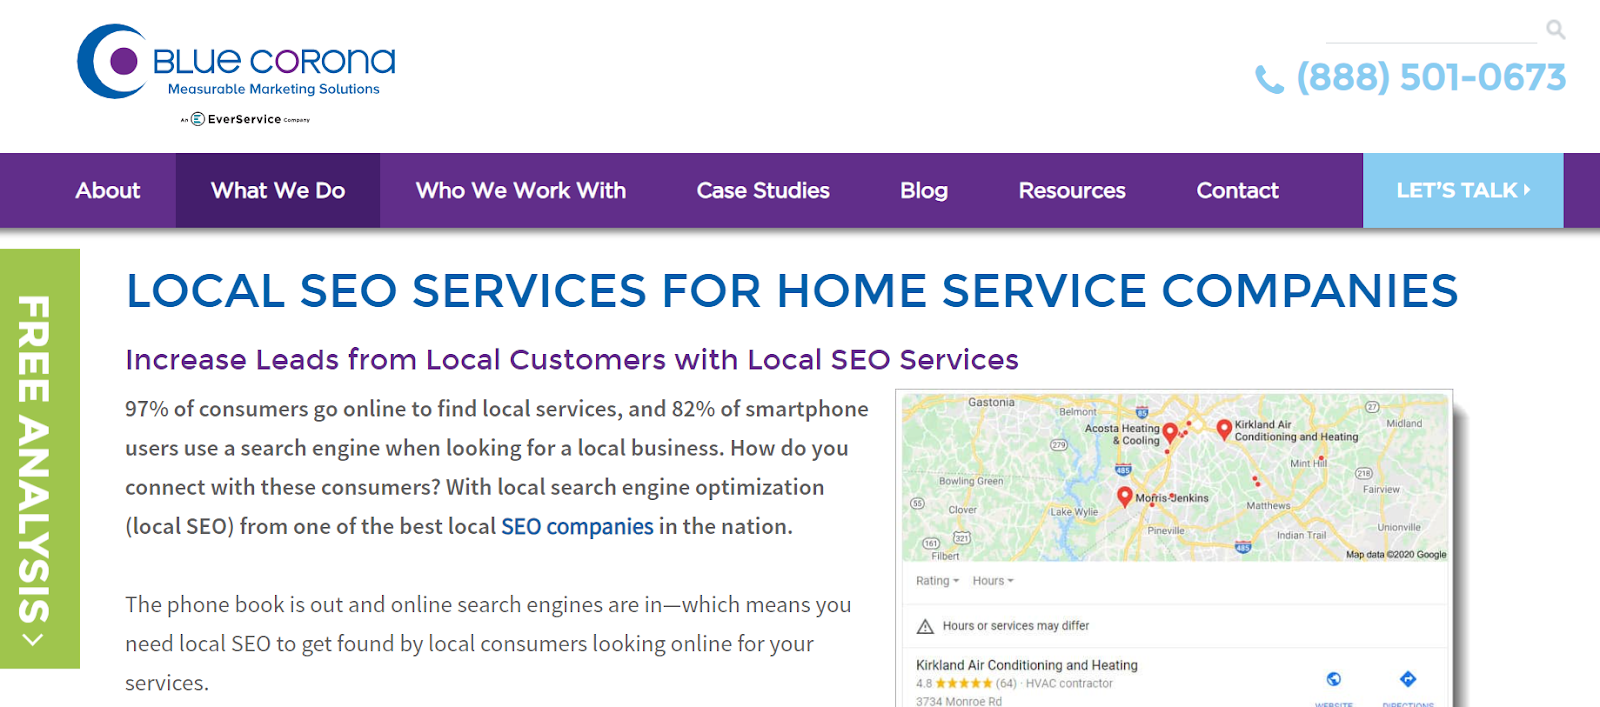 Blue Corona listed as one of the best SEO companies for Home Services